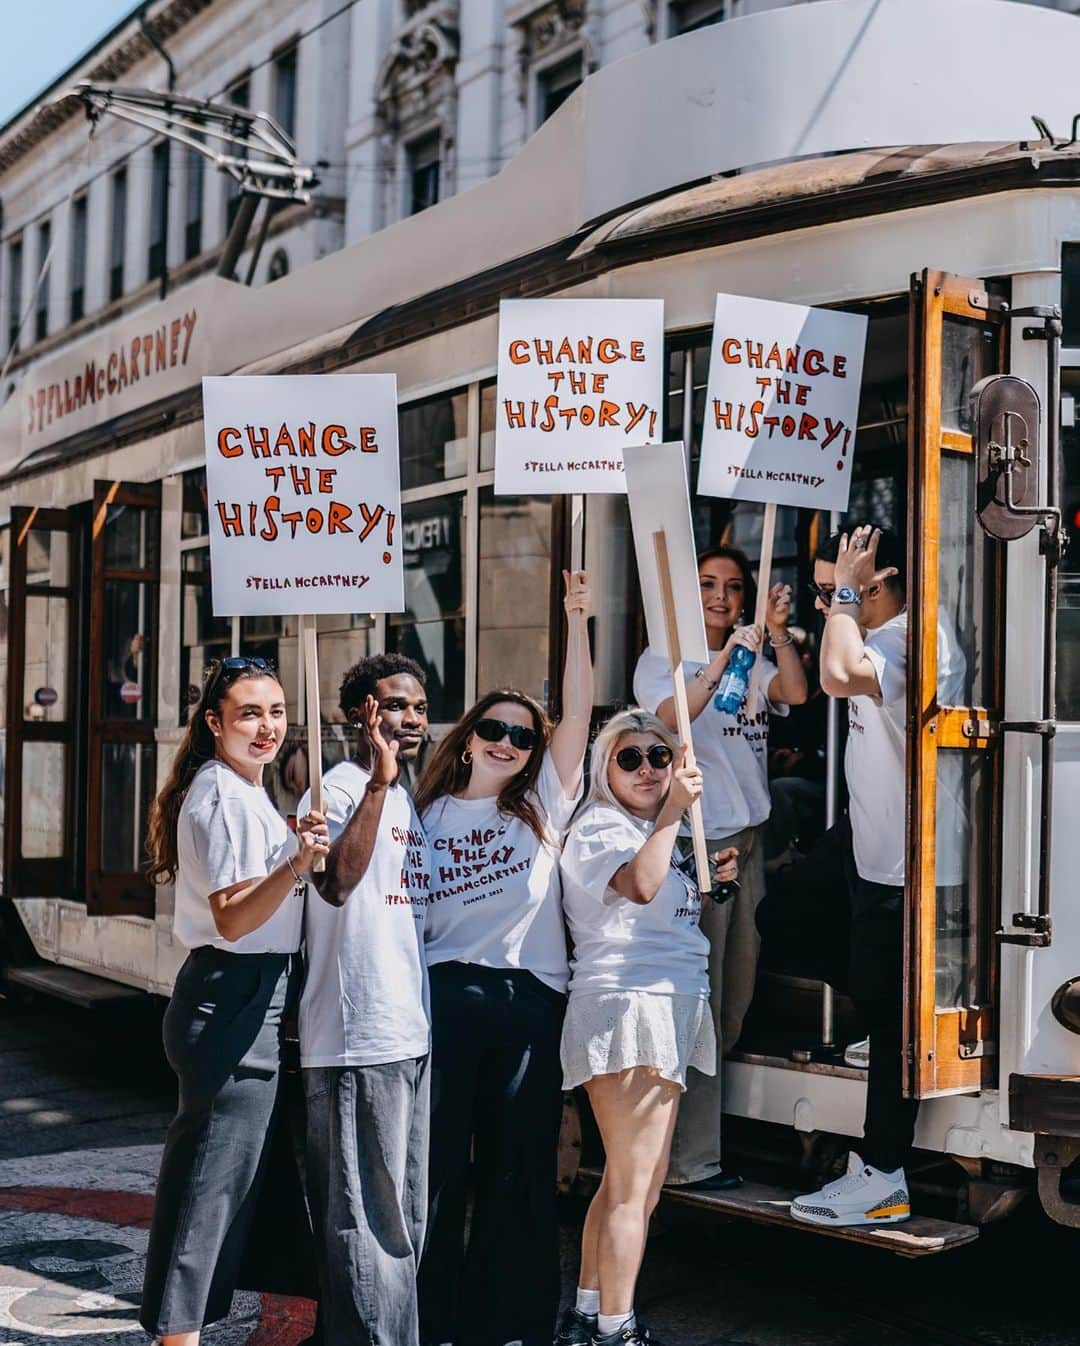 ステラ・マッカートニーさんのインスタグラム写真 - (ステラ・マッカートニーInstagram)「EARTH DAY: Next-gen changemakers took to the streets in London, Milan and Paris, asking people how they would ‘Change the History’.  Inspired by the art and activist spirit of Yoshitomo Nara, the students from Istituto Marangoni (@Istitutomarangoni_Milano, @IstitutoMarangoni_London) and Parsons Paris (@ParsonsParis) marched from iconic landmarks like Duomo di Milano to our Stella McCartney flagships — raising awareness for Mother Earth and starting conversations about conscious fashion and protecting our fellow creatures.  How would you ‘Change the History’ for animals and Mother Earth?  Discover more and sign our pledge with PETA (@PETAUK) to end the use of leather at the link in bio.  Featured students:  @larissa.mrmt @viktoriia_teterina_ @mina___media @x.rocco @goodnxws @dianakempe @urunlicensedtherapist @Piperdayee @kaitlynacameron @hazarahmedd @lucysavannahberry @symphonysavoy @d8kwan @titi_heart @kaitlynacameron @hazarahmedd @kathrohn @rebeccatricarico @hollyxgeorge @micaelavallejog @julianamedici_ @iarinaoprea @azizazh123 @akketilda @bibibarbaro_ @delphine_weisss @shirkwin @idoshemesh  @noahasan @lukovic.mia @khalmunt @irfanxjamal_xx @duryyy_ @igor_falo9 @la.cabrii @ximefochoa @philippapatriciaa @ambramaria_ @anna.vall @kmicelis.styling @mericolle @ashikapera @susyguerreros @letimarazzi @ardelean_andreea @drisha.sharma @choguan666 @themongery  #StellaMcCartney #EarthDay #EarthDay2023 #ChangeTheHistory #vegan #crueltyfree #PETA」4月23日 21時15分 - stellamccartney